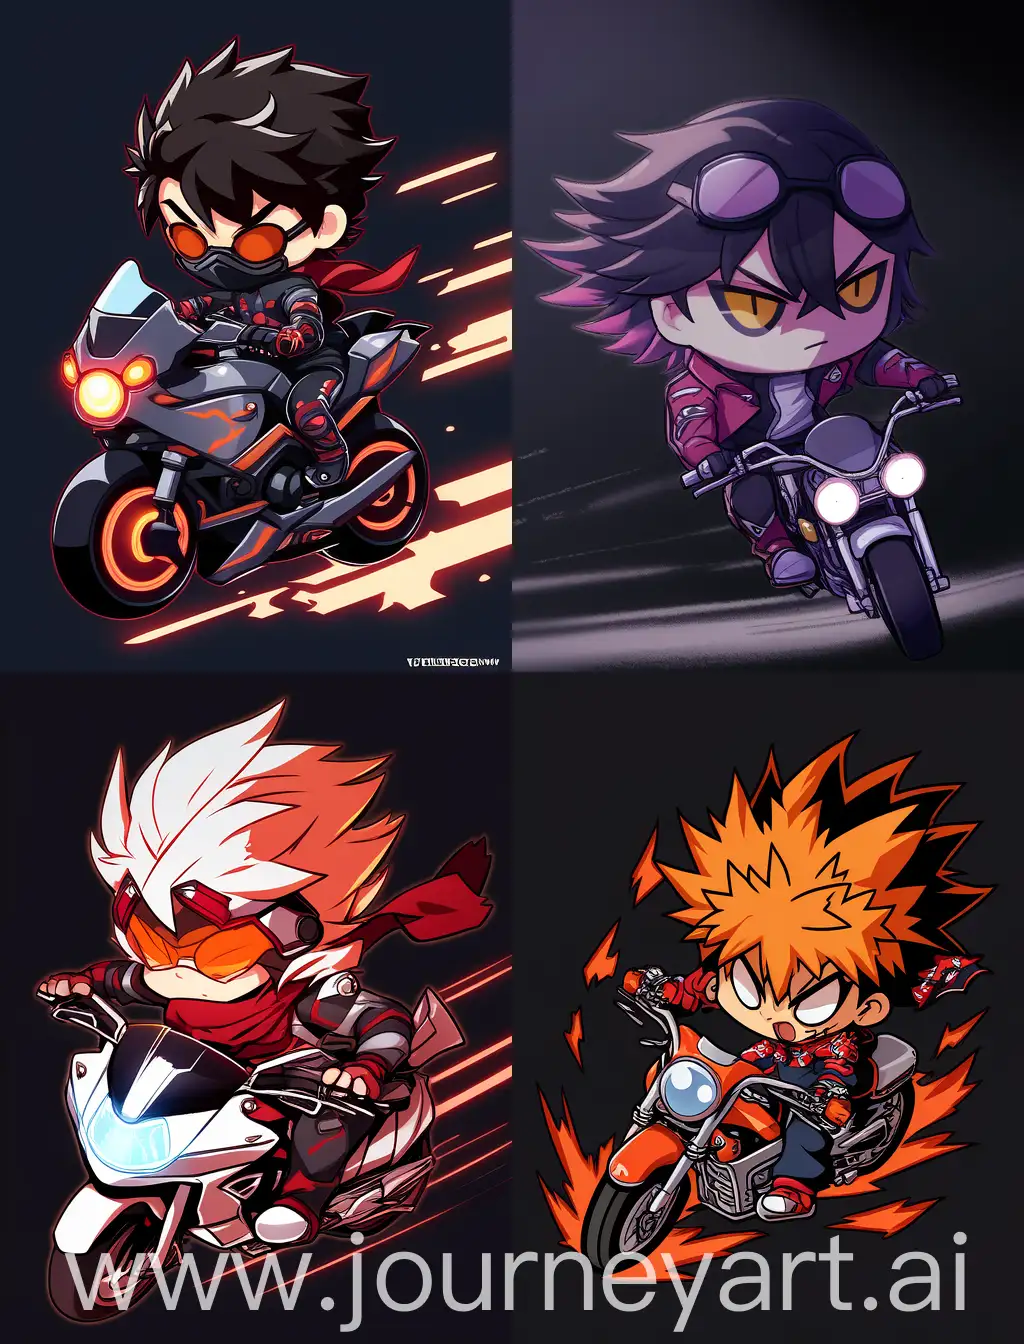 Fierce-Chibi-Anime-Character-Riding-Motorcycle-in-Bold-Cartoon-Style